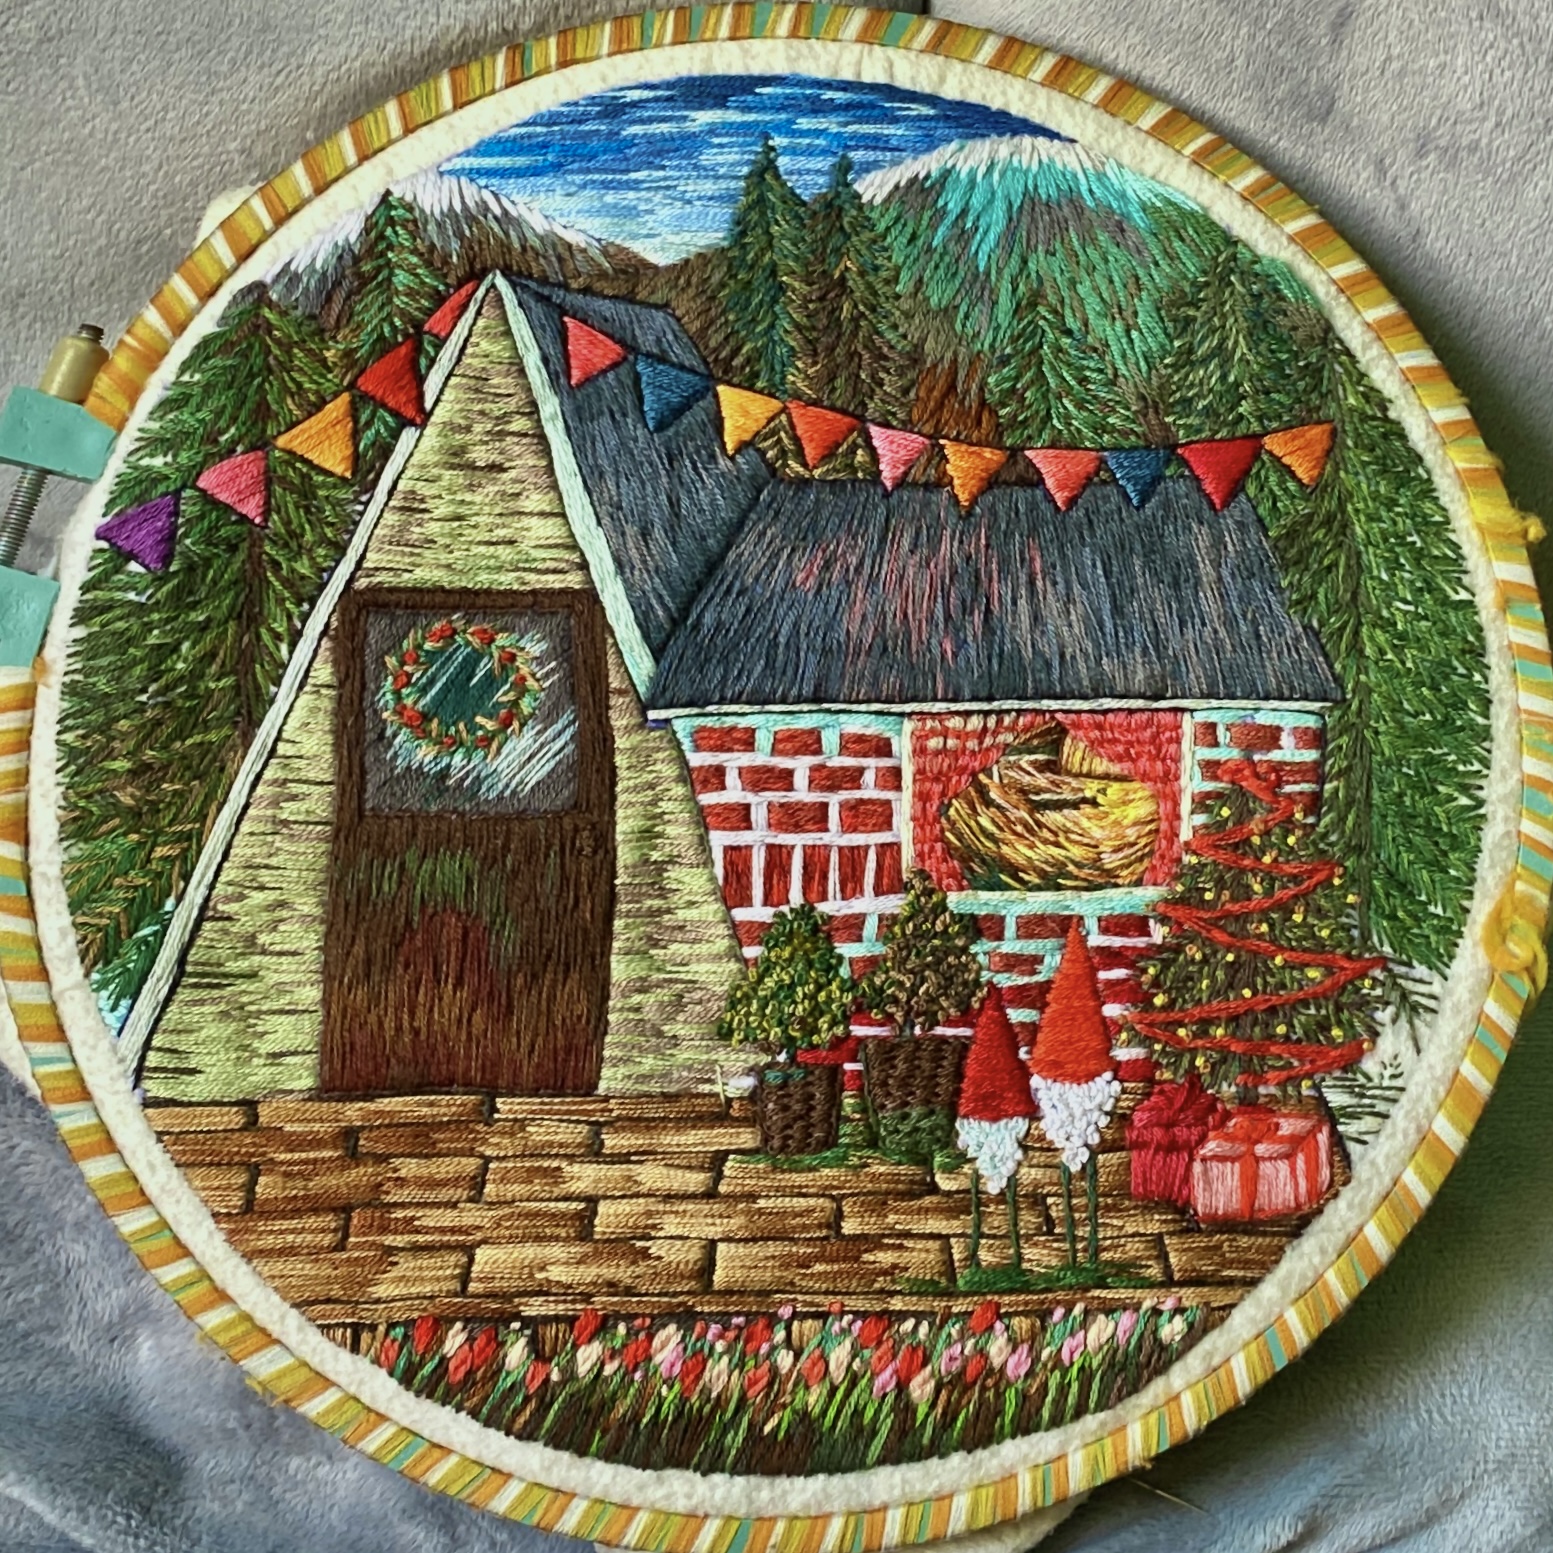 A Christmas-themed embroidery piece by Thach Ngoc Phuc Yen. Photo: Ngoc Phuong / Tuoi Tre News